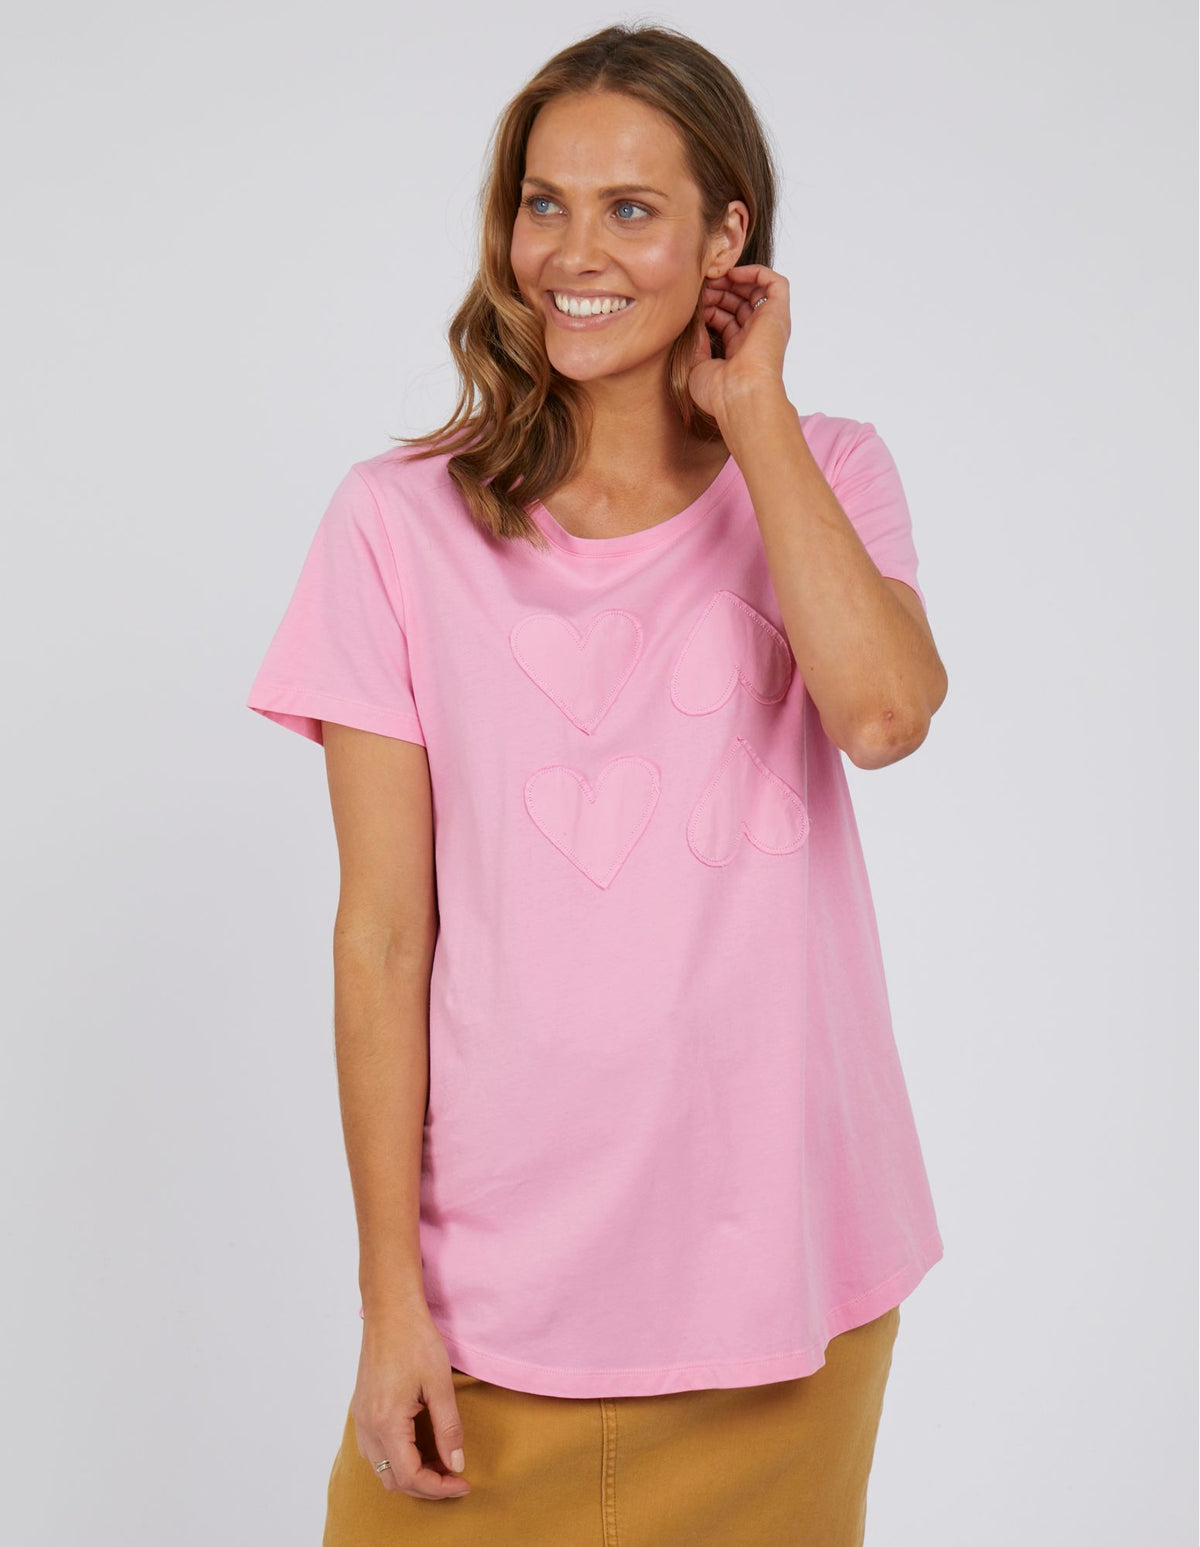 Fall In Love Tee - Sherbet Pink - Elm Lifestyle